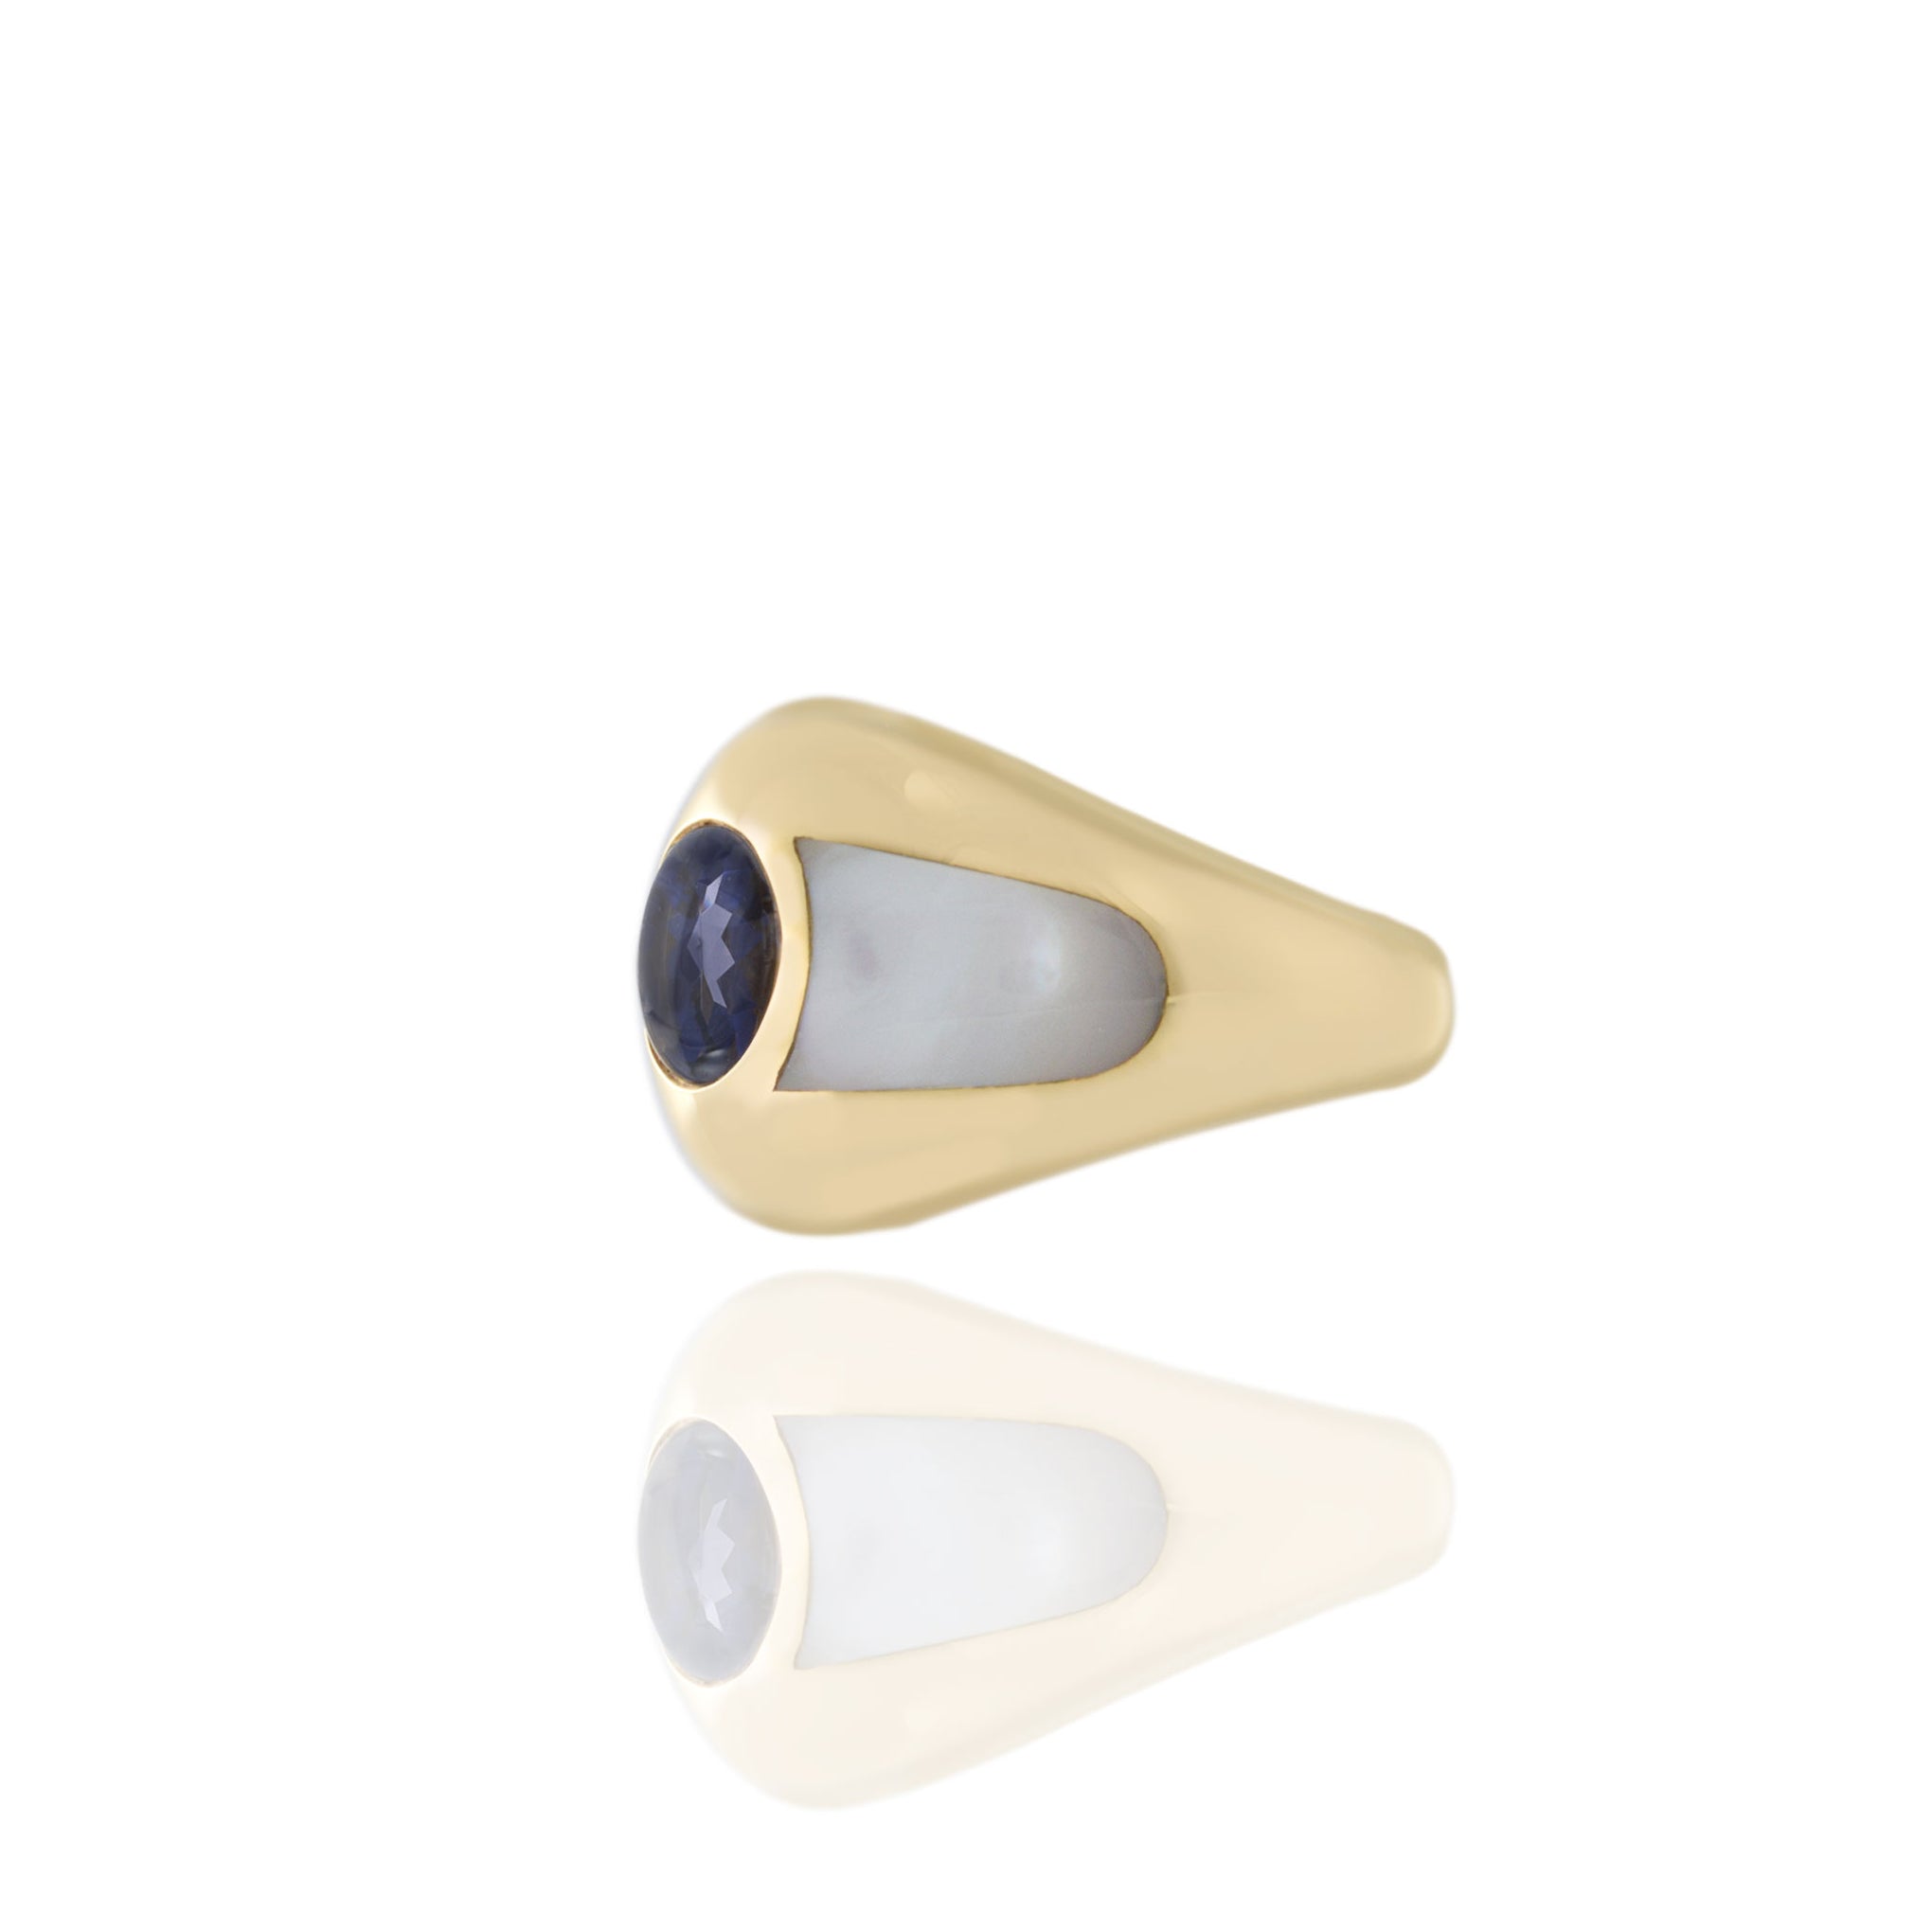 Vintage Mauboussin 18KT Yellow Gold Blue Iolite Dome Ring